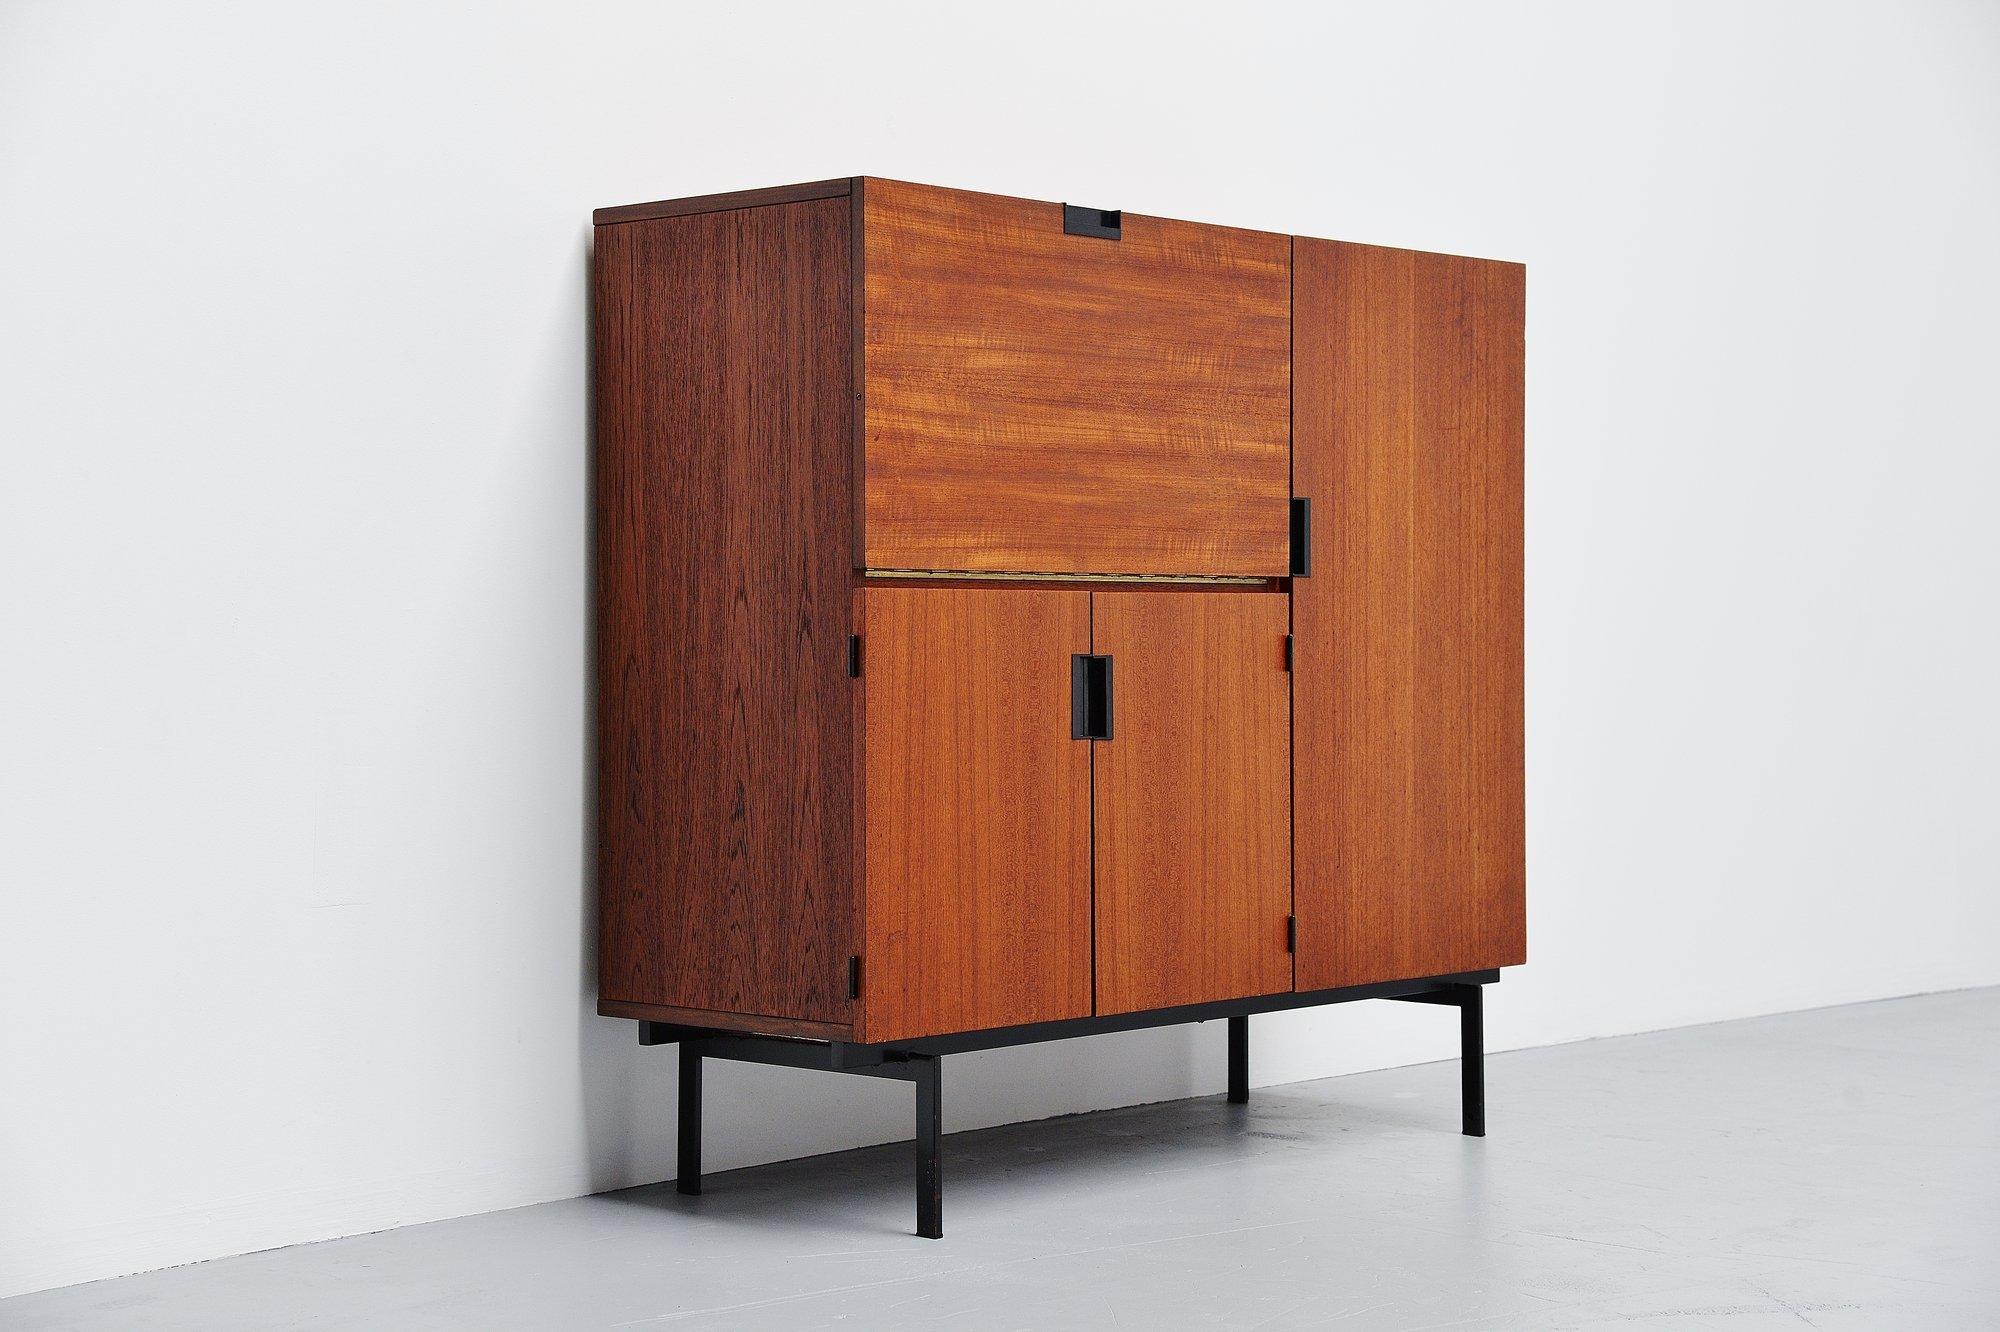 Very nice teak wooden cabinet designed by Cees Braakman and manufactured by Pastoe UMS, Holland 1958. This is for model CU06 and has a drop down door on the left with white shelves and storage behind, 2 folding doors underneath with a shelve behind